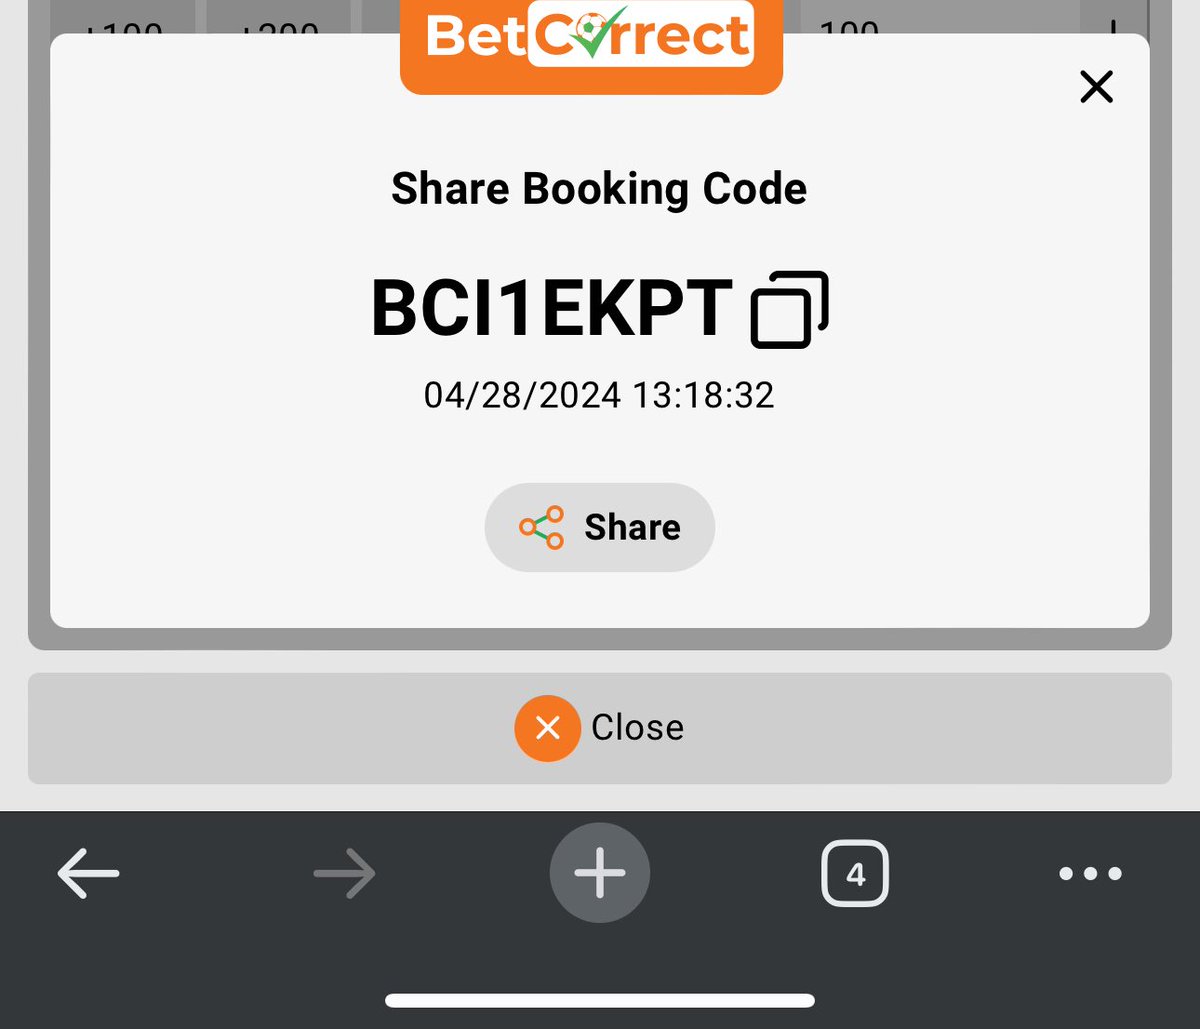 11 Odds of the day on Betcorrect Code >> BCI1EKPT REGISTER HERE>> betcorrect.com Don’t miss out🔞